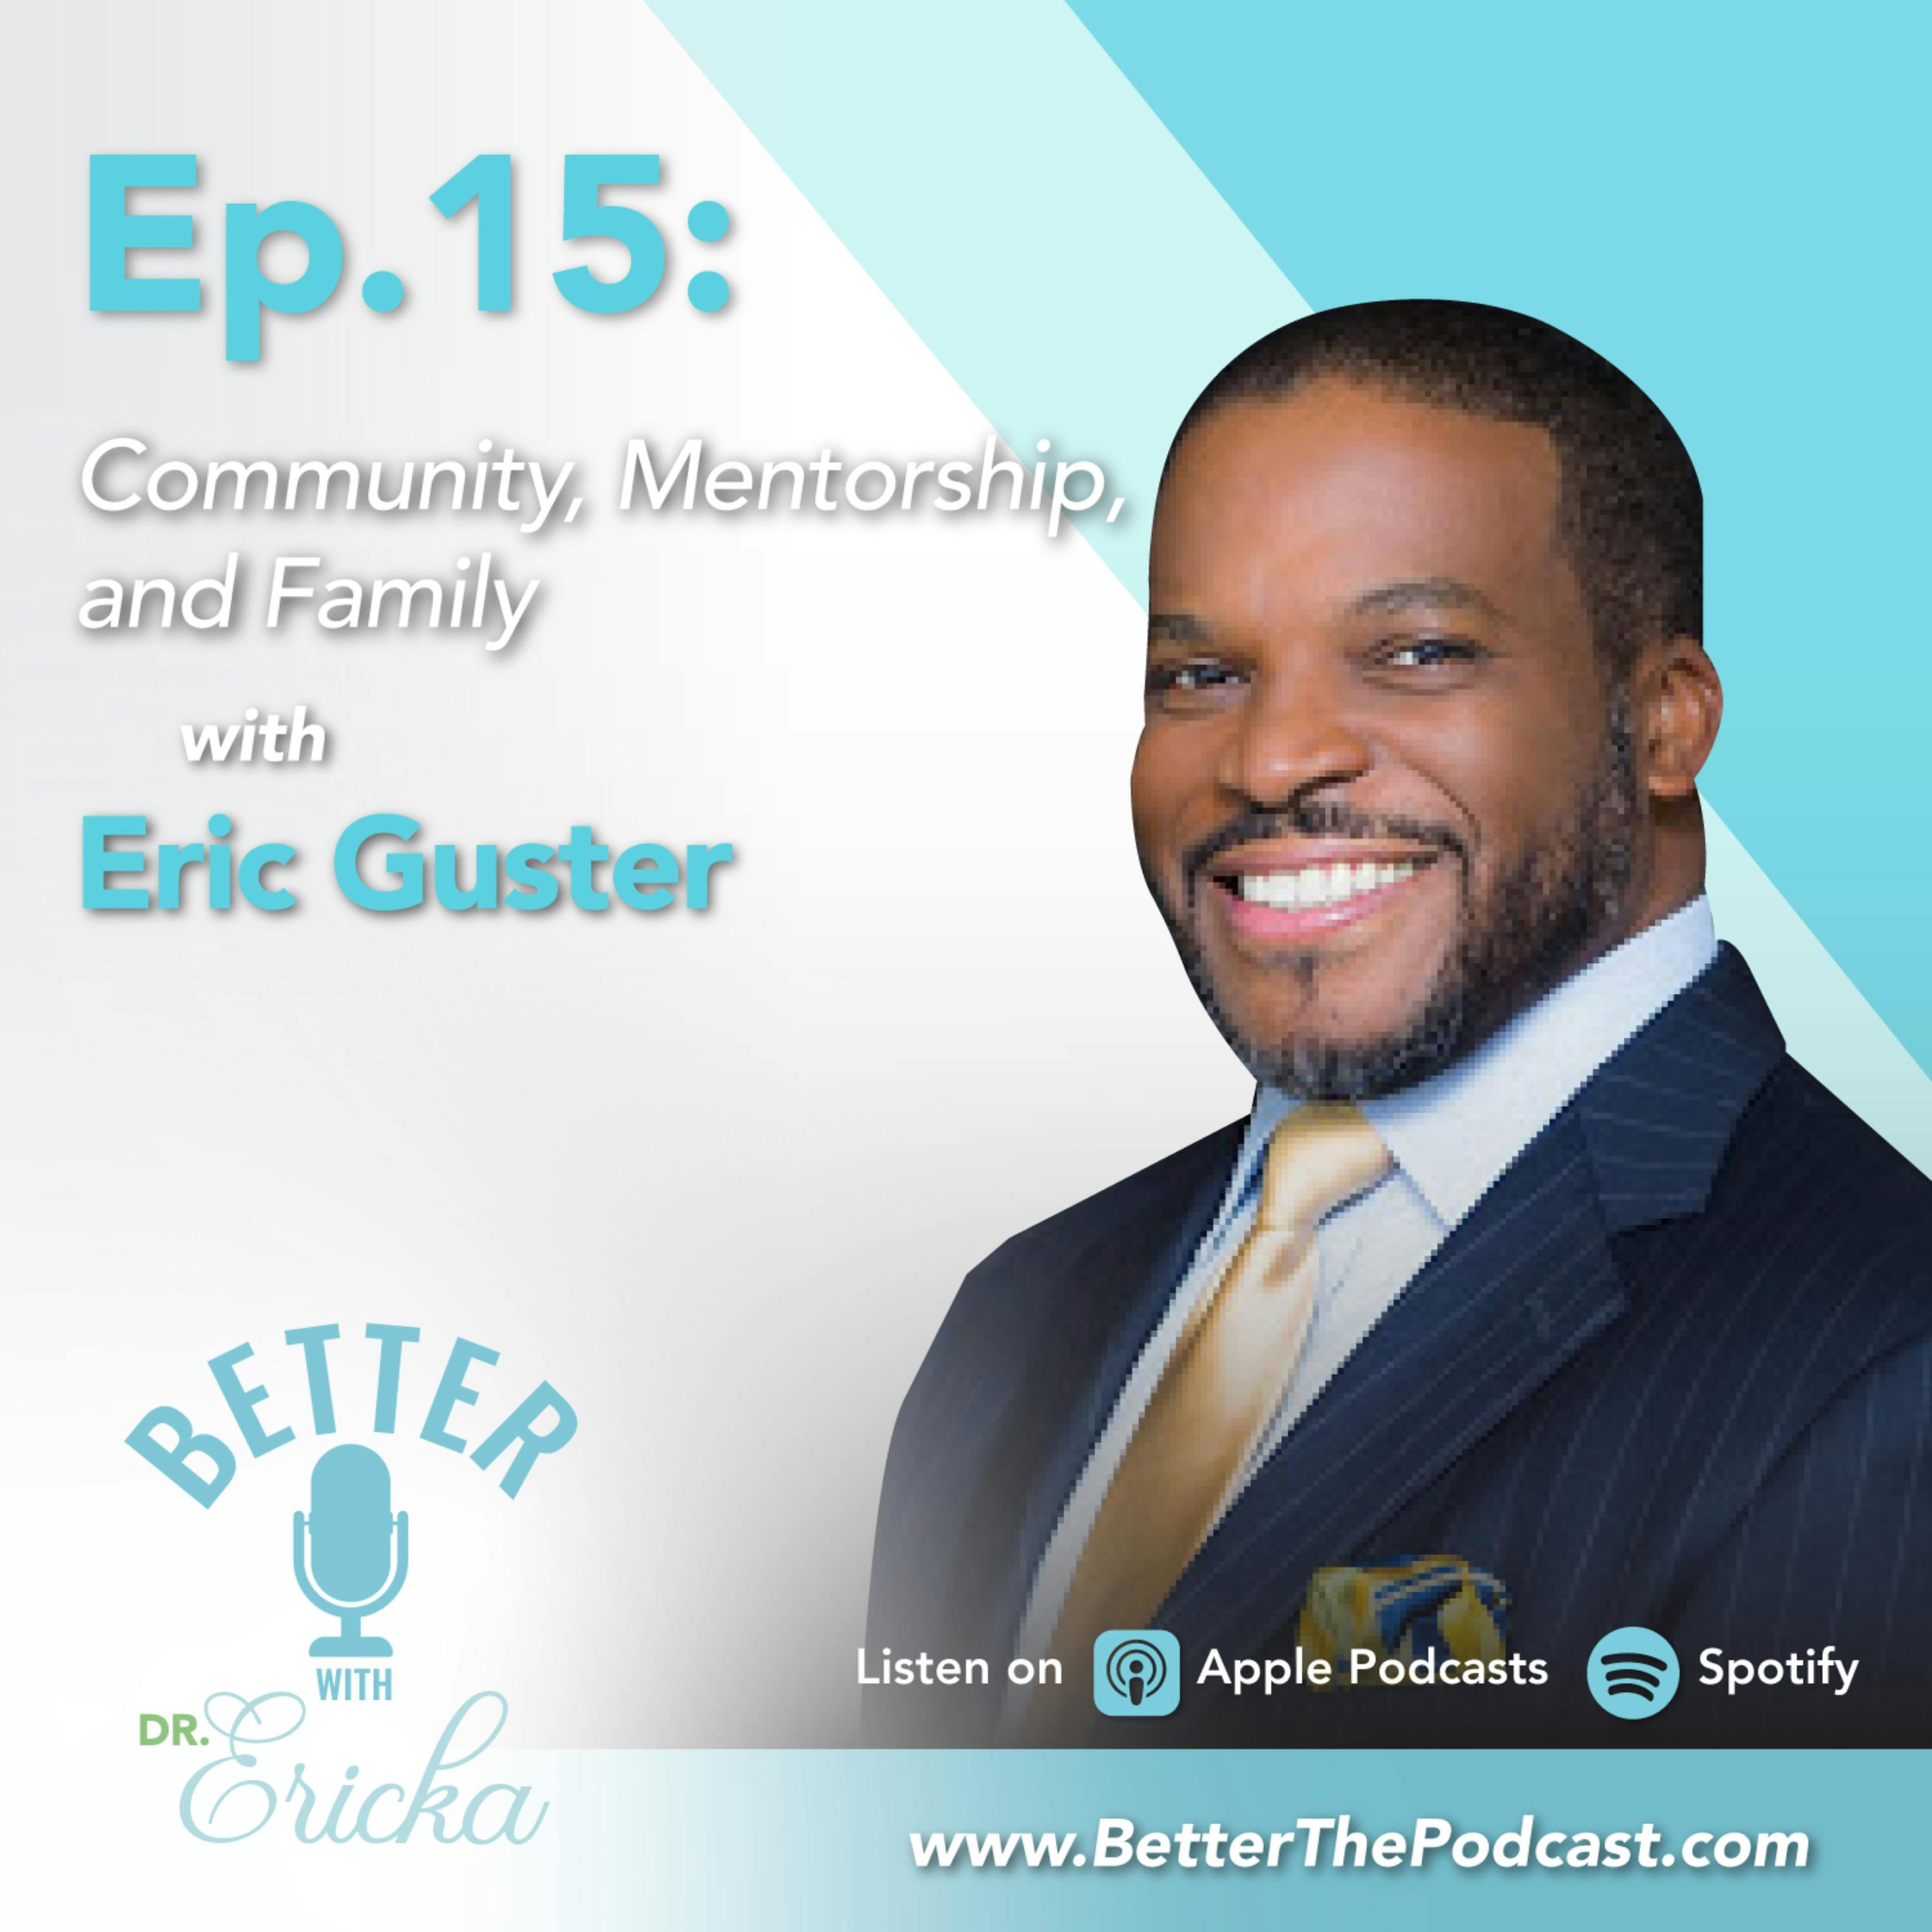 Community, Mentorship, and Family with Eric Guster